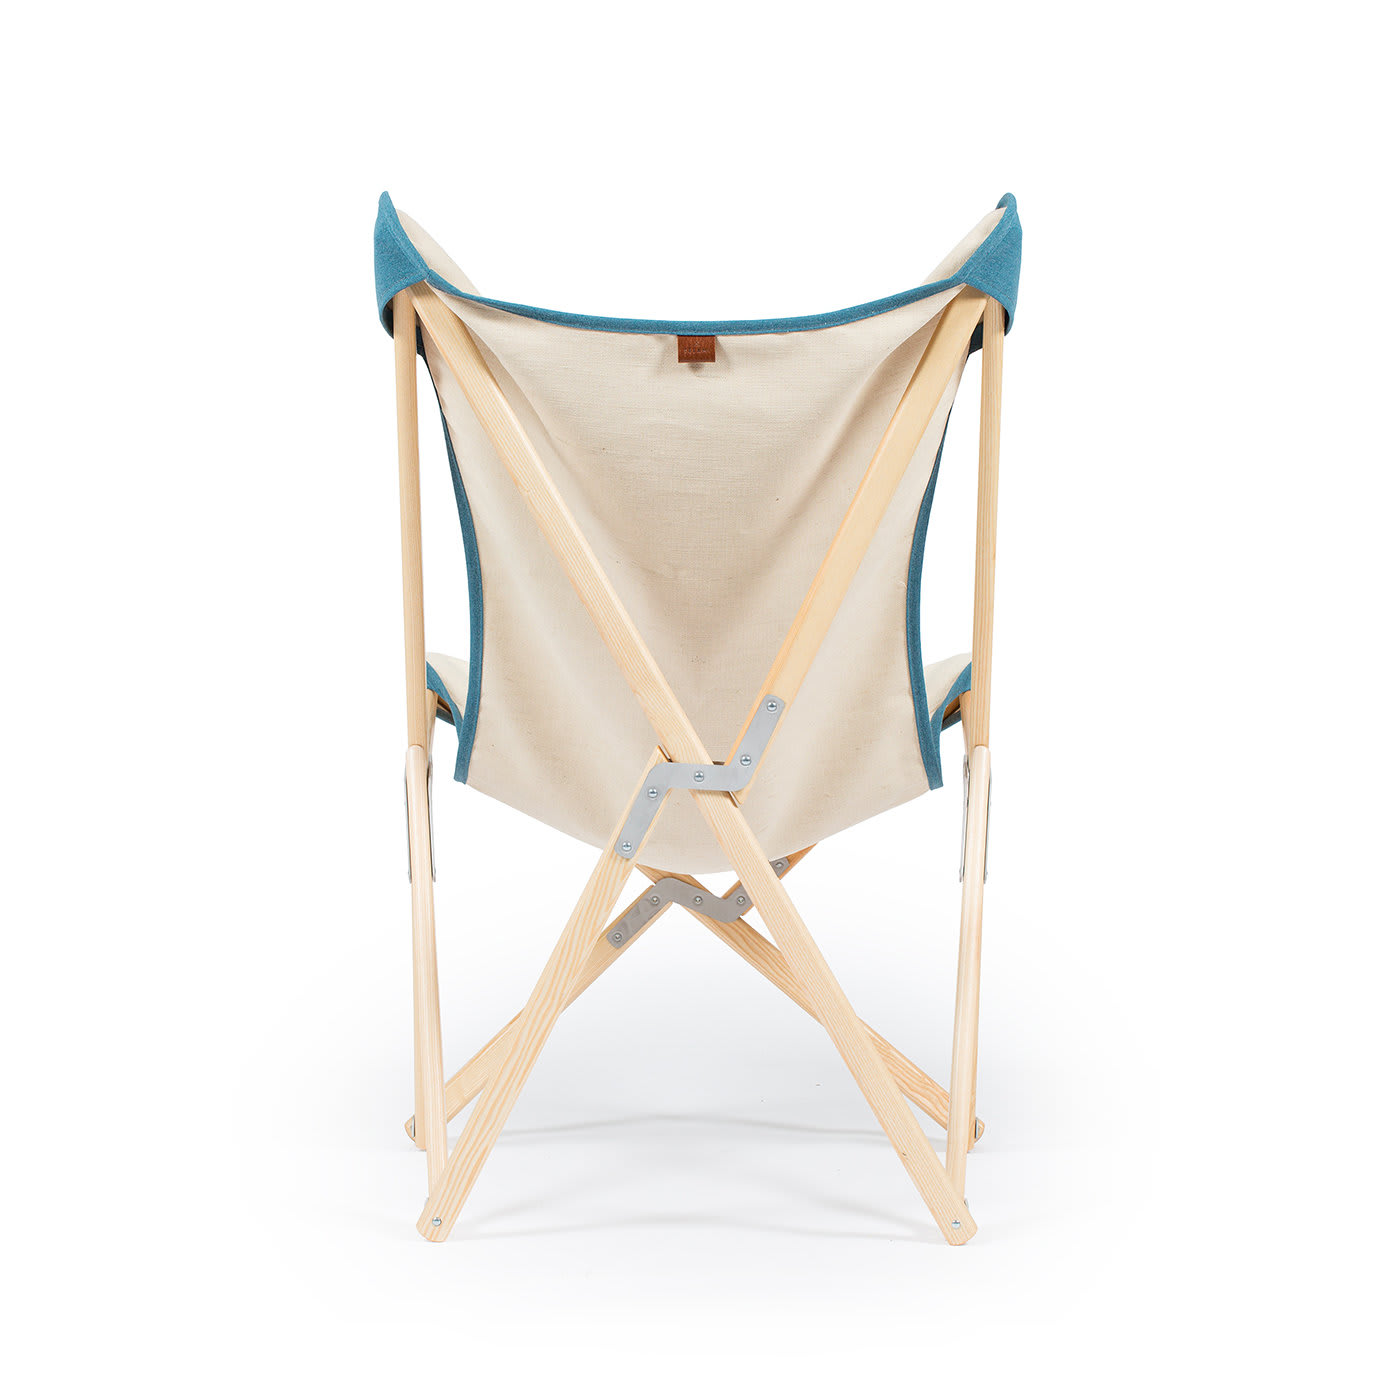 Tripolina Armchair in Cream and Teal Blue - Telami